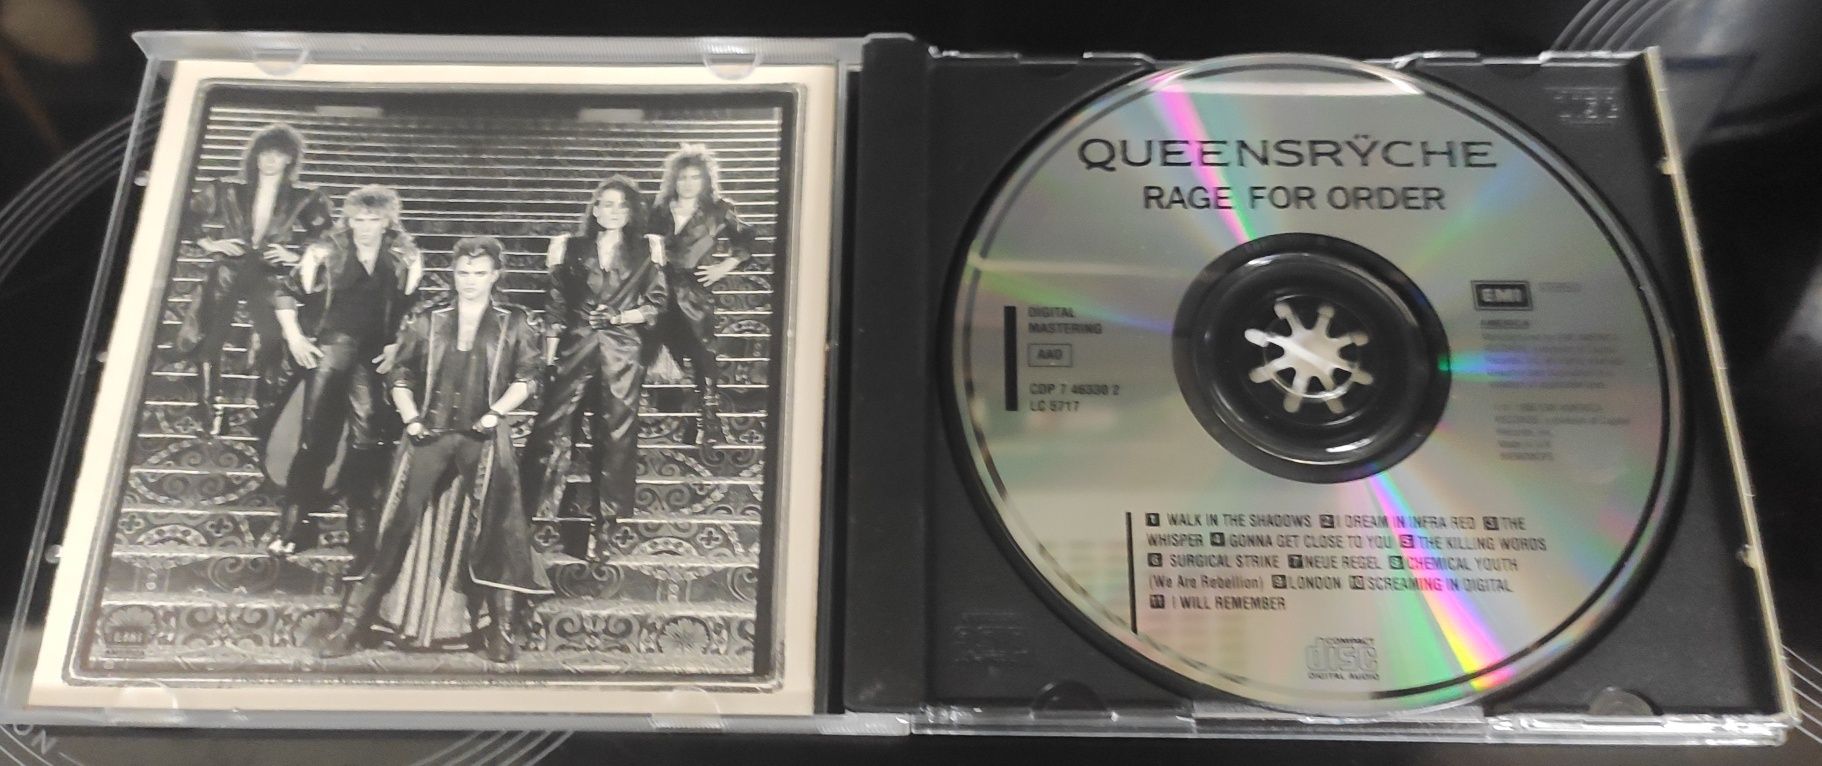 Queensryche "Rage for Order" cd